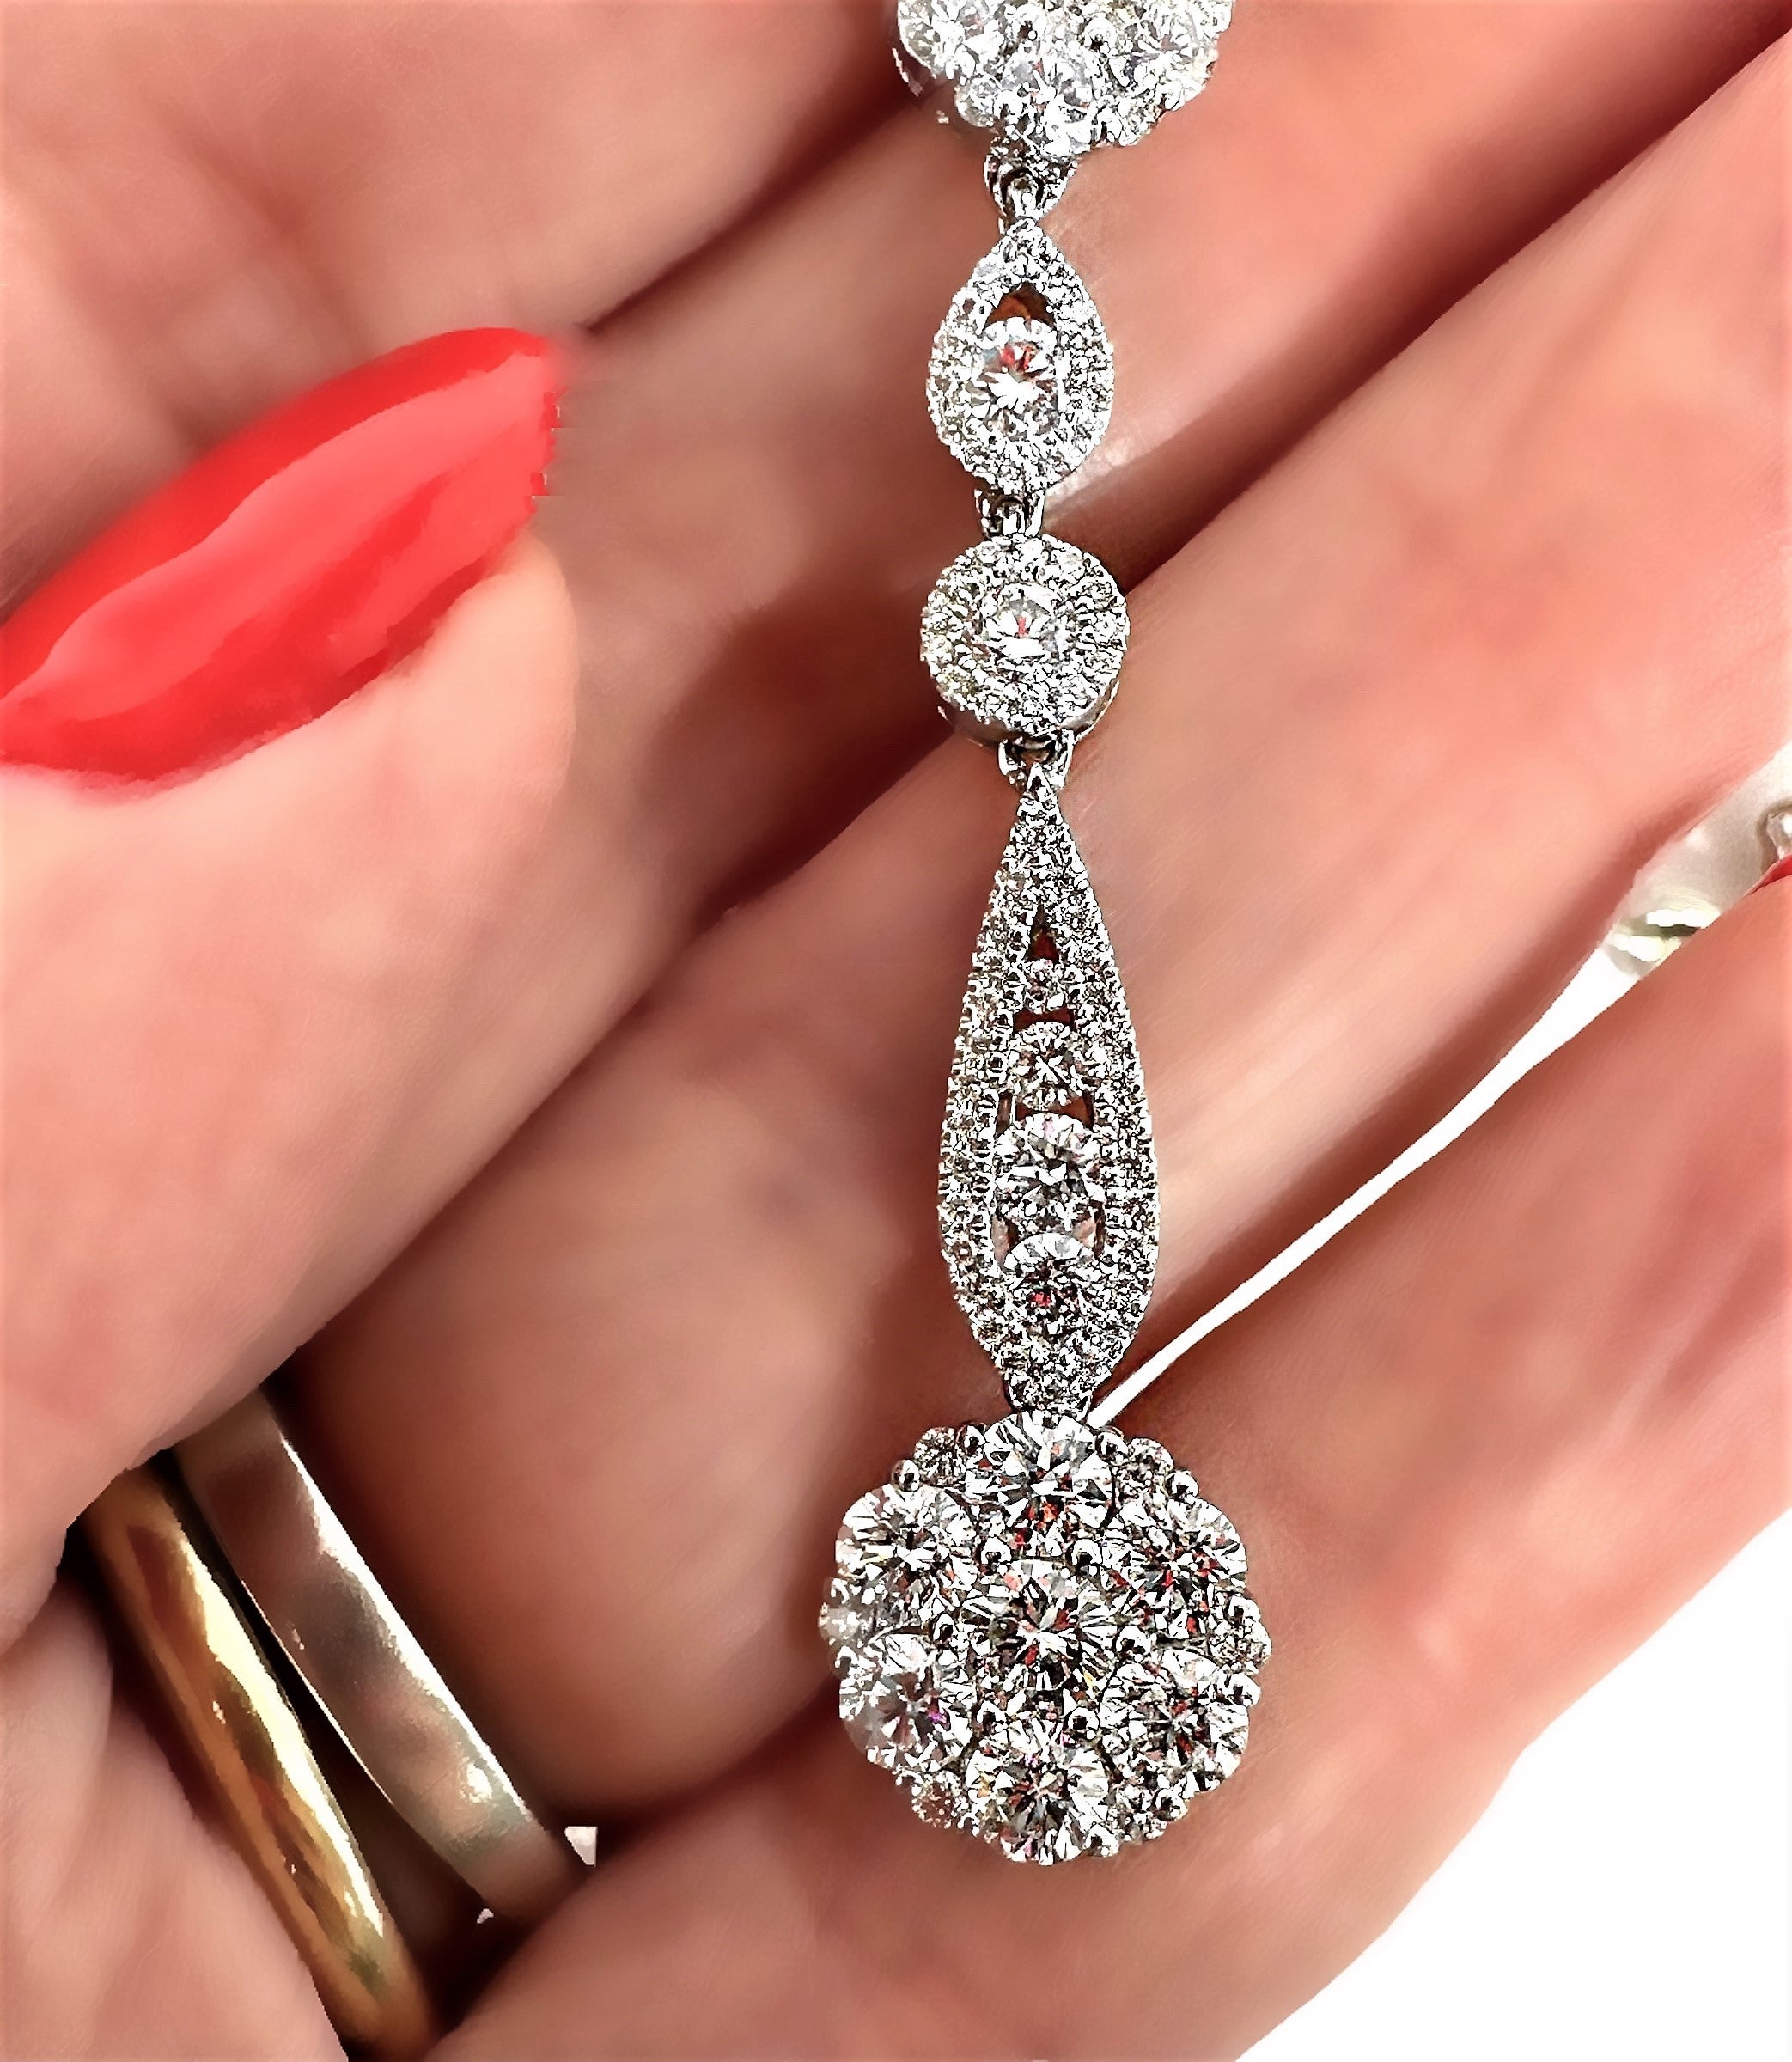 This modern design 18K white gold and diamond necklace absolutely shimmers and scintillates. The necklace measures 18 inches in length, and from the center hangs a 1 5/8 inch diamond encrusted drop. Crafted in a heavy and durable 18K white gold